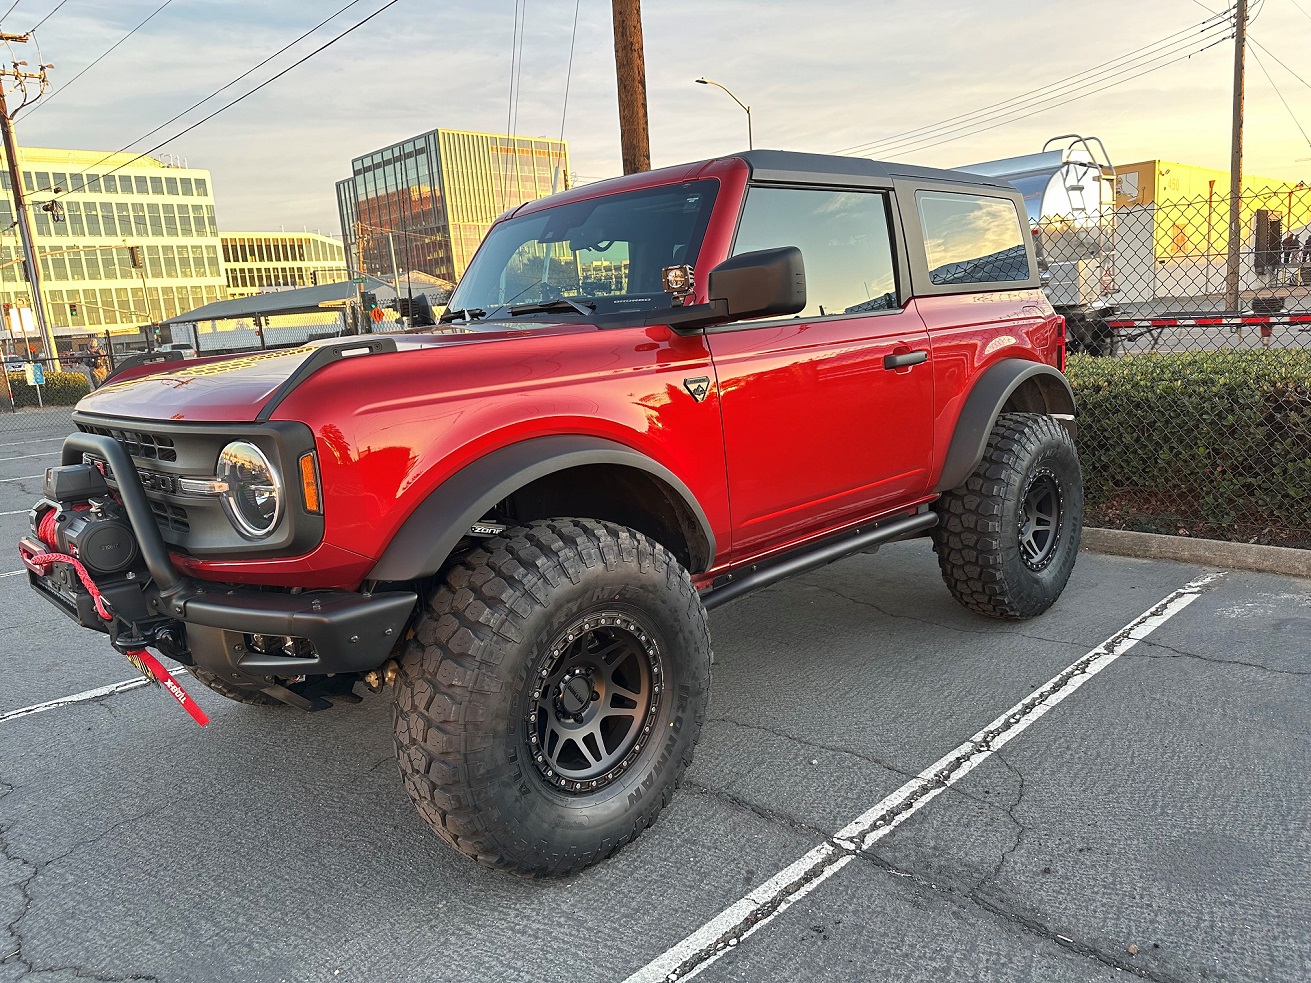 Ford Bronco Then & Now: show your assembly line Bronco and current Bronco picture BroncoBirthdayPic2023a